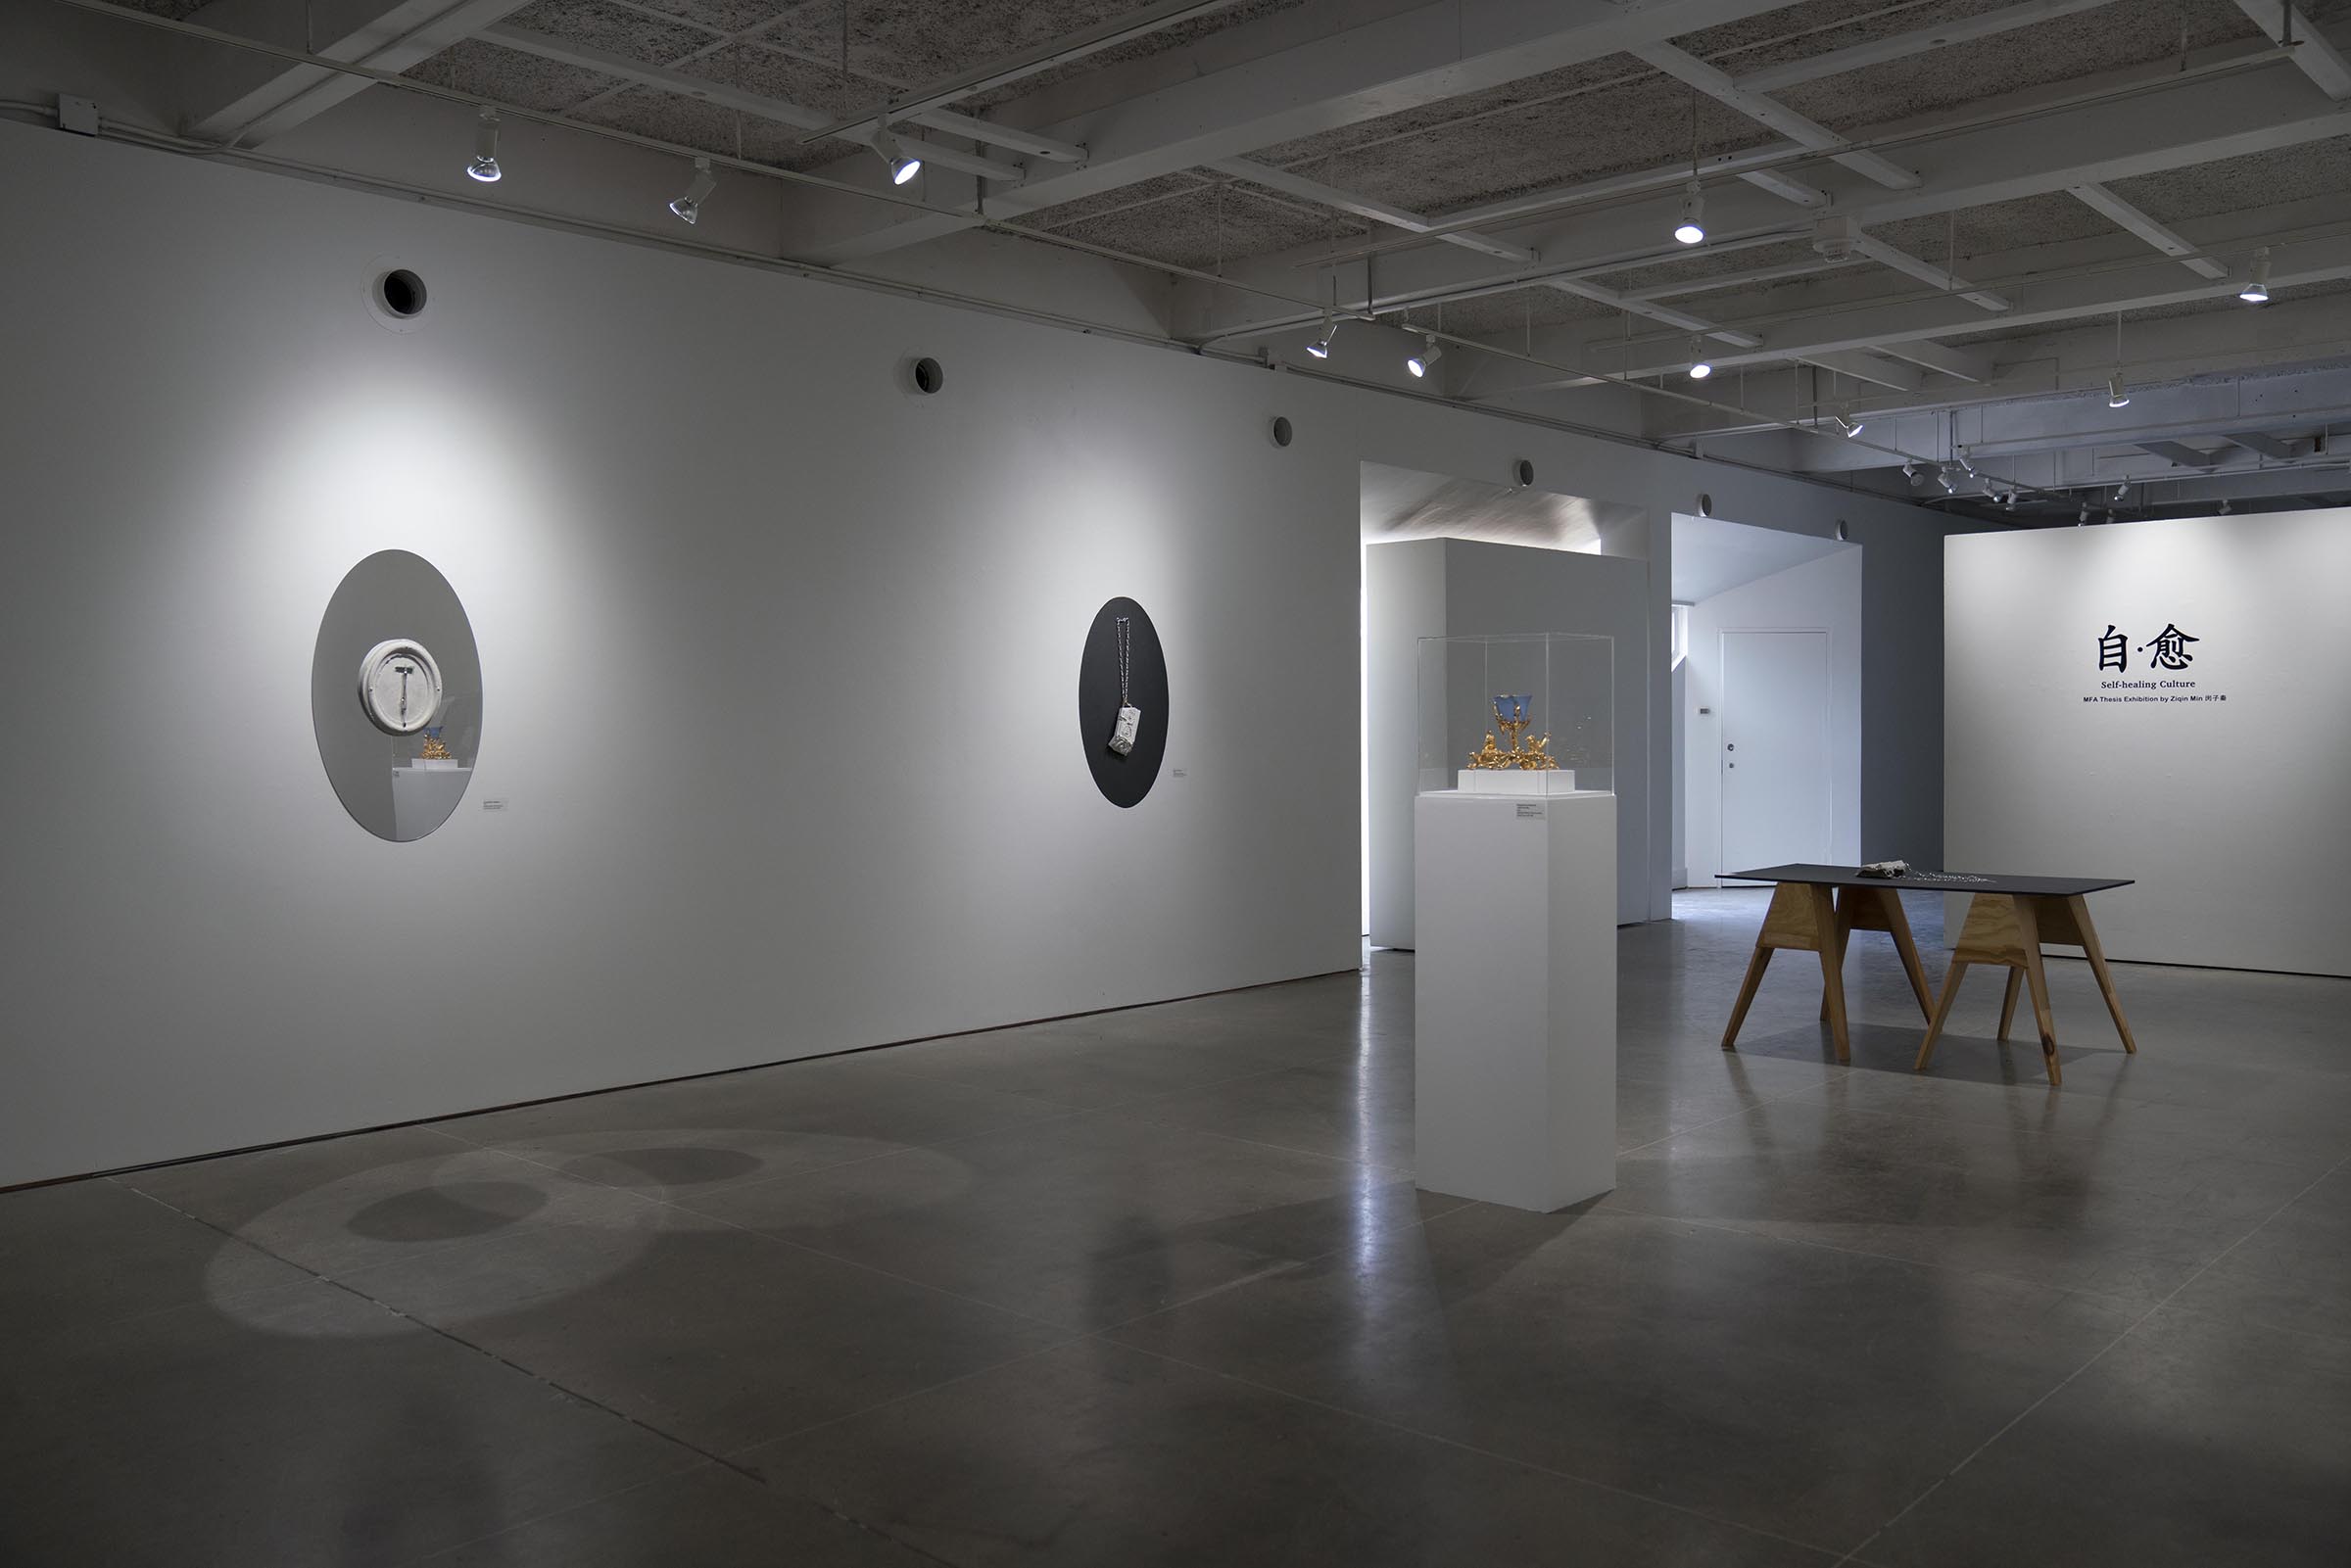 Installation view of 自 𐩑 愈 Self-healing Culture Master of Fine Arts Exhibition by Ziqin (Marsh) Min at Gallery 7, Humanities Building, University of Wisconsin-Madison.